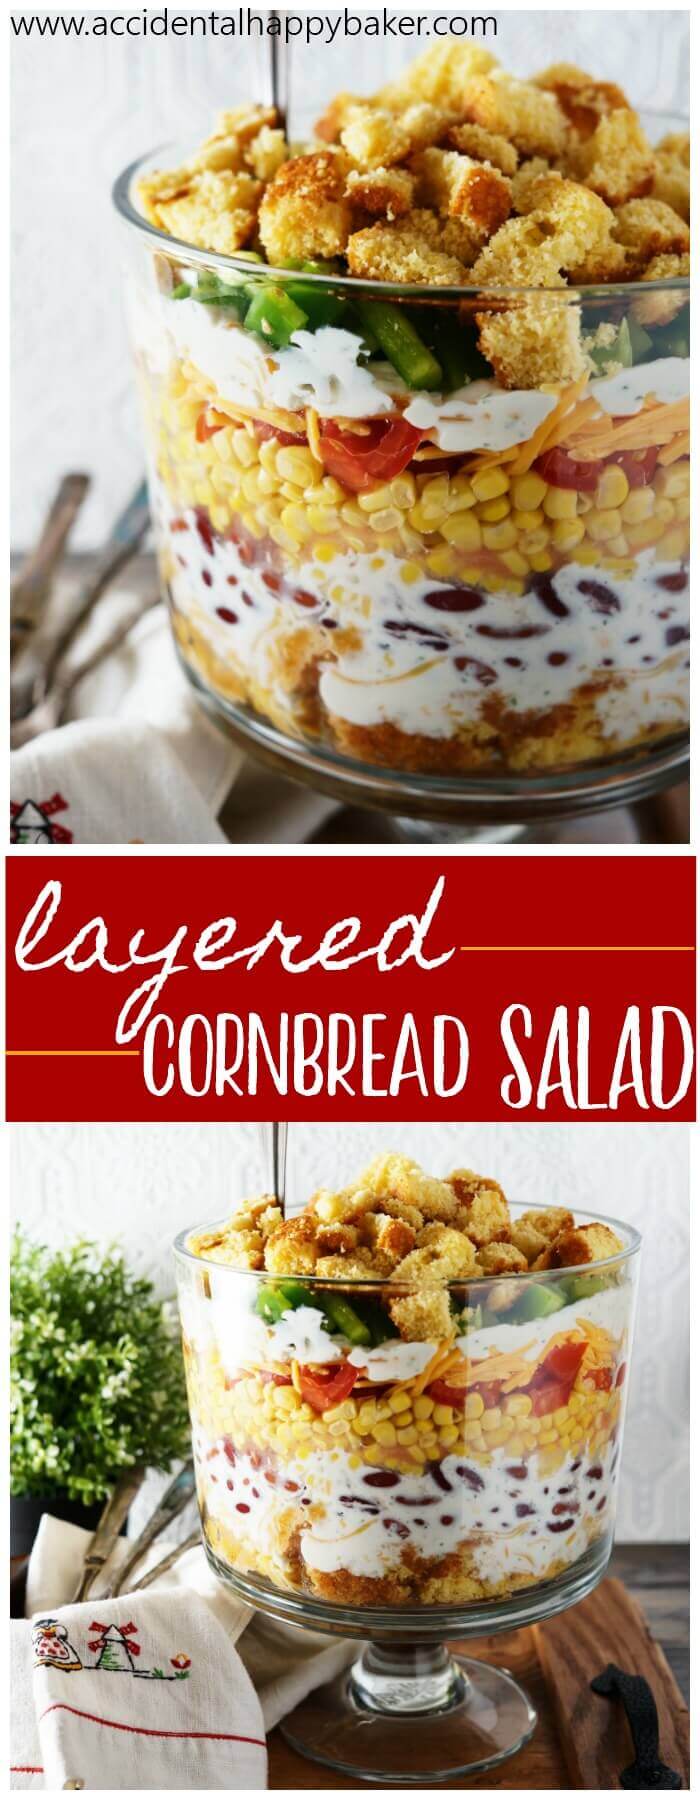 Fresh veggies are layered high with cornbread, cheese and ranch dressing. It’s crunchy, creamy, savory, and with the cornbread, just a hint of sweet as well for a combination that can’t be beat.